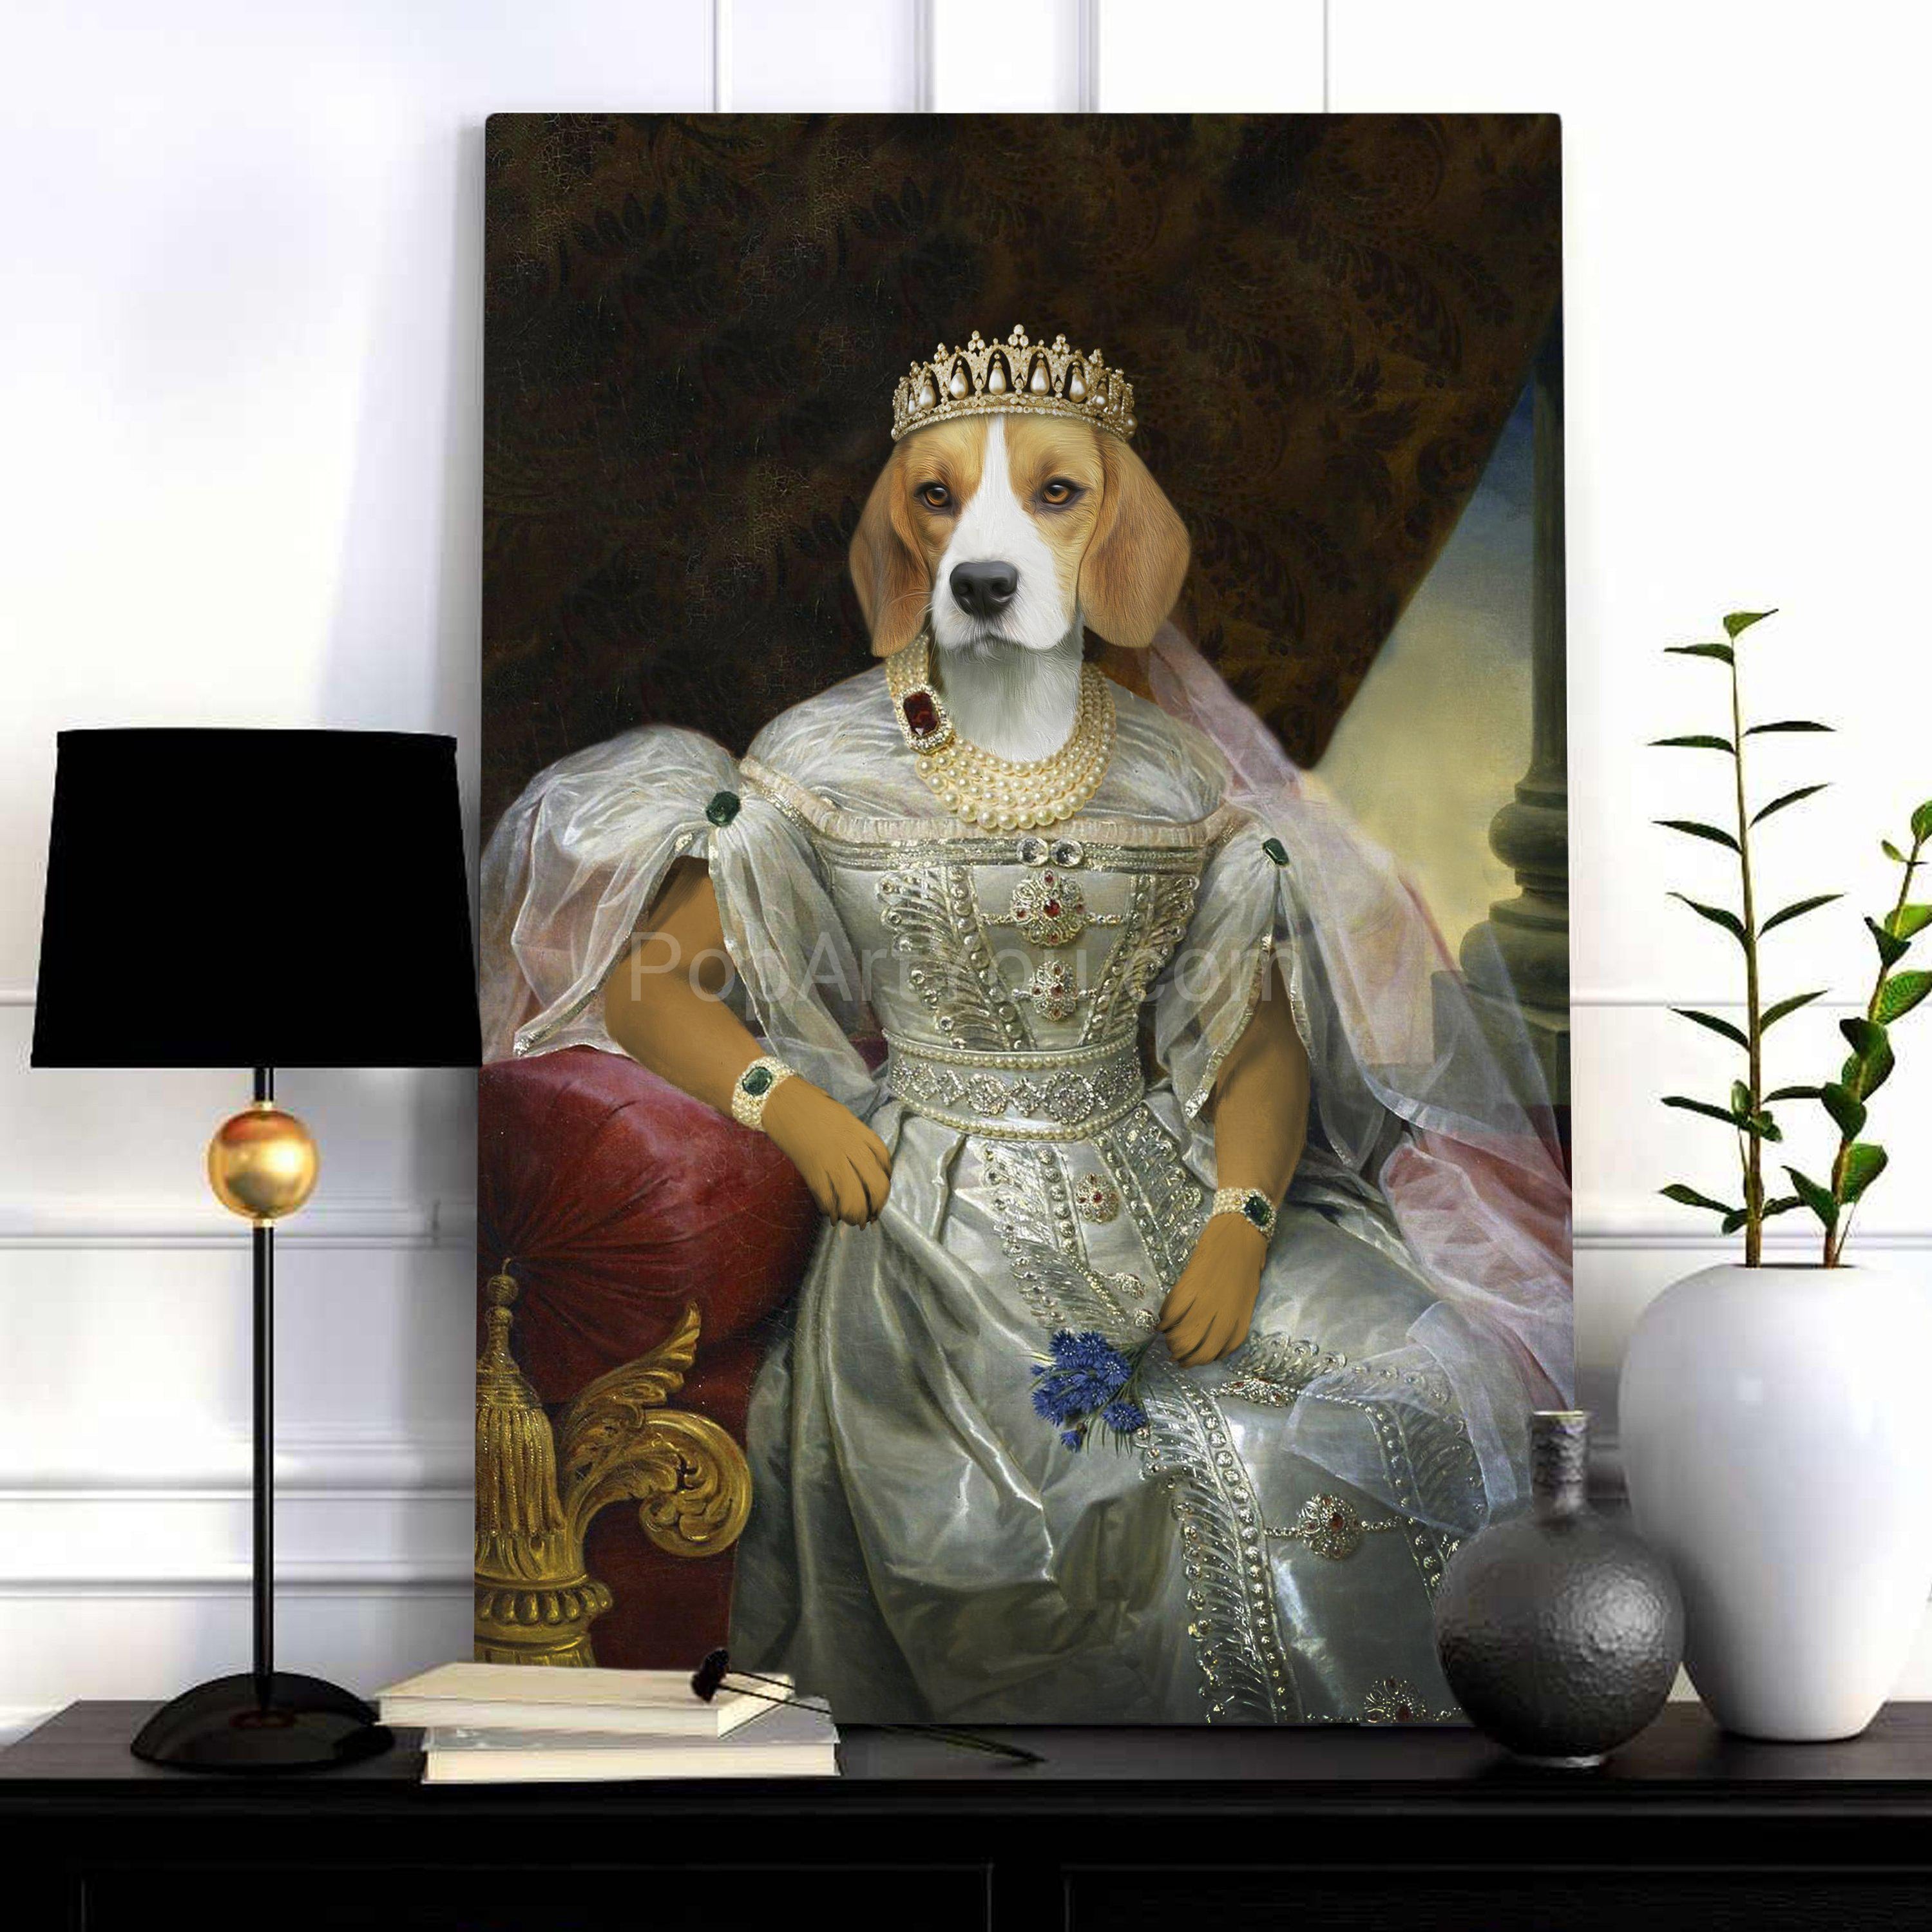 Portrait of a female dog with a human body dressed in a silver royal dress with a crown stands on a wooden table near a white vase